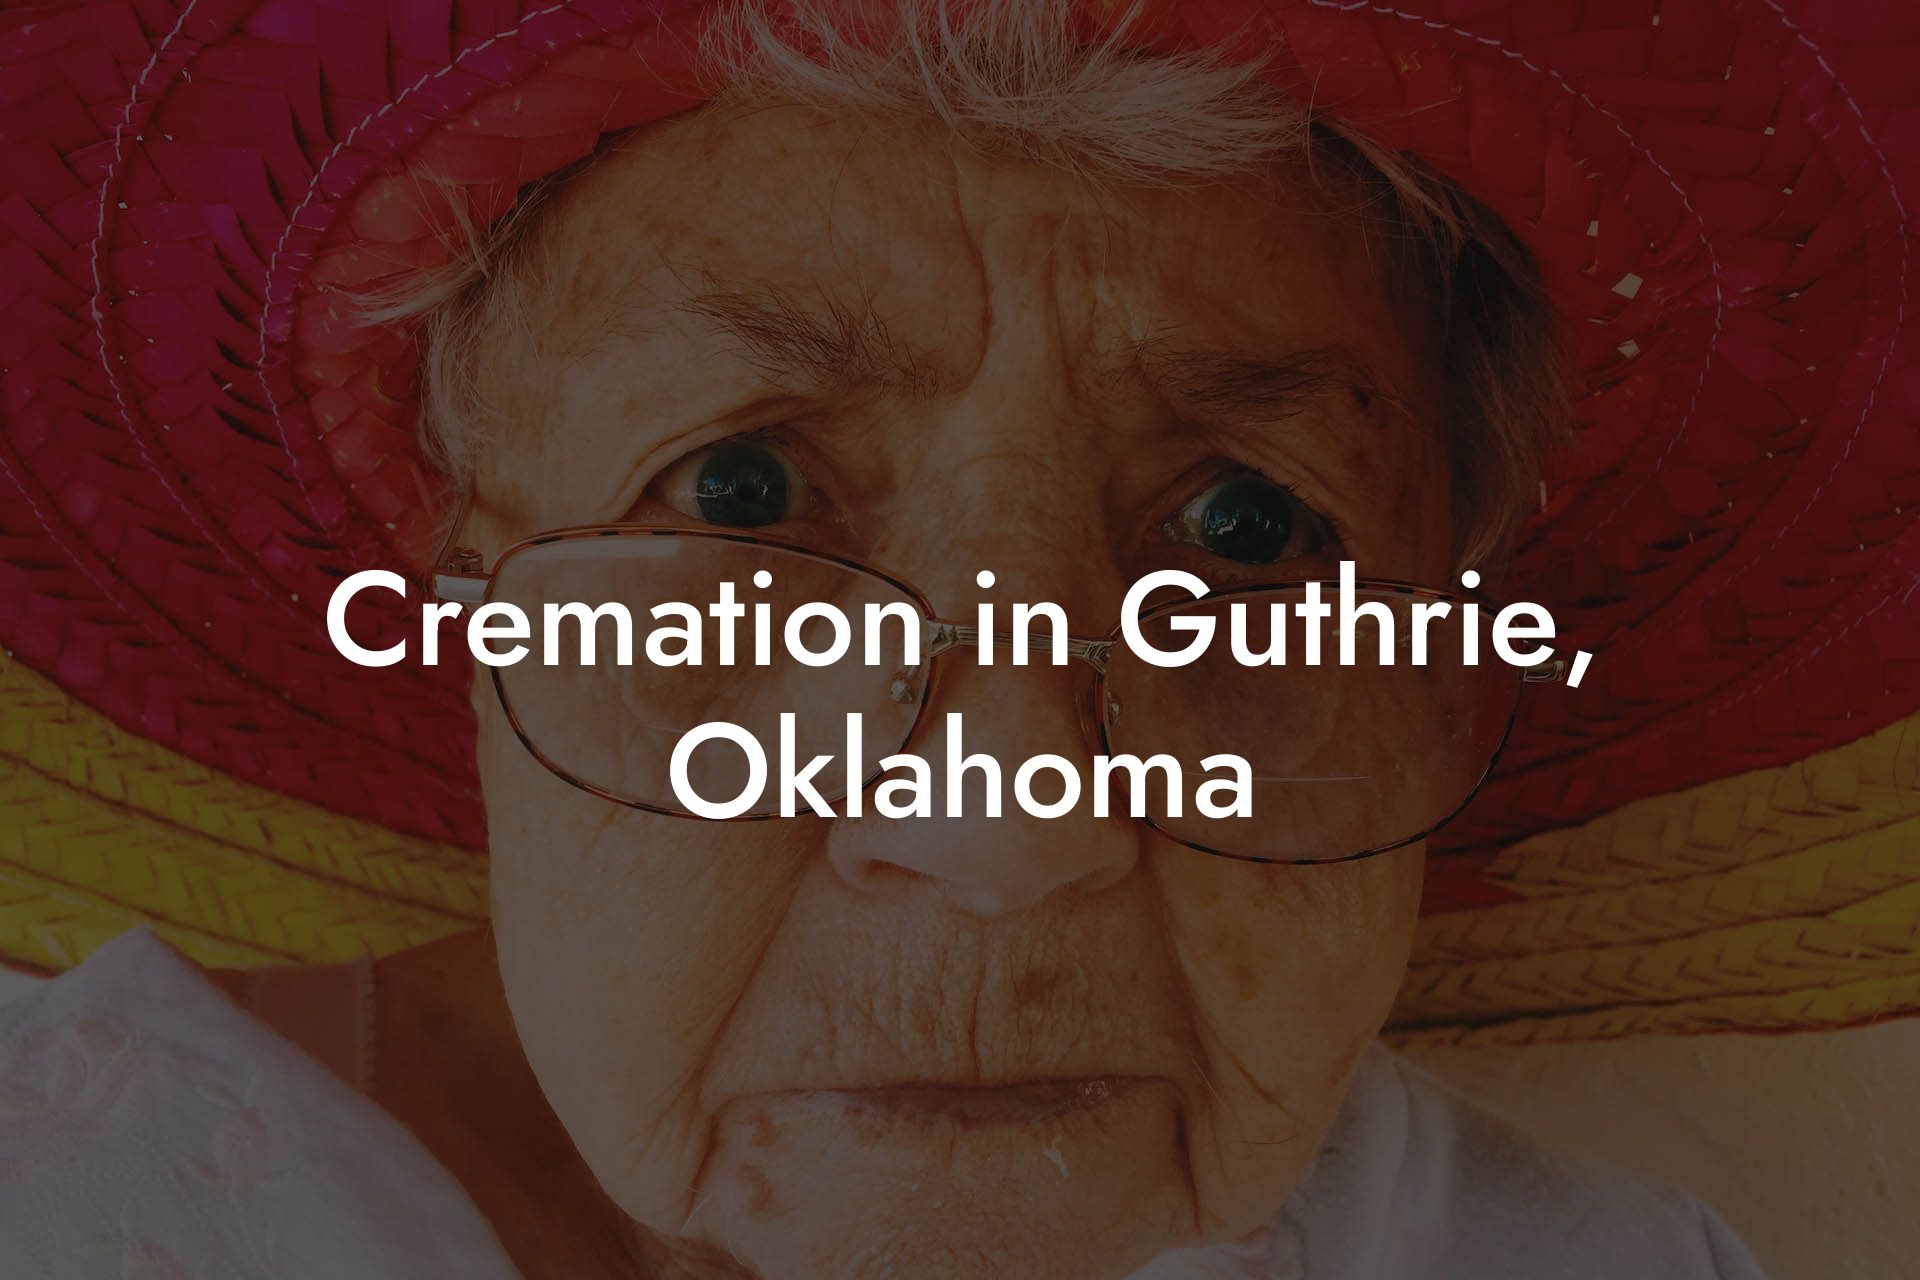 Cremation in Guthrie, Oklahoma